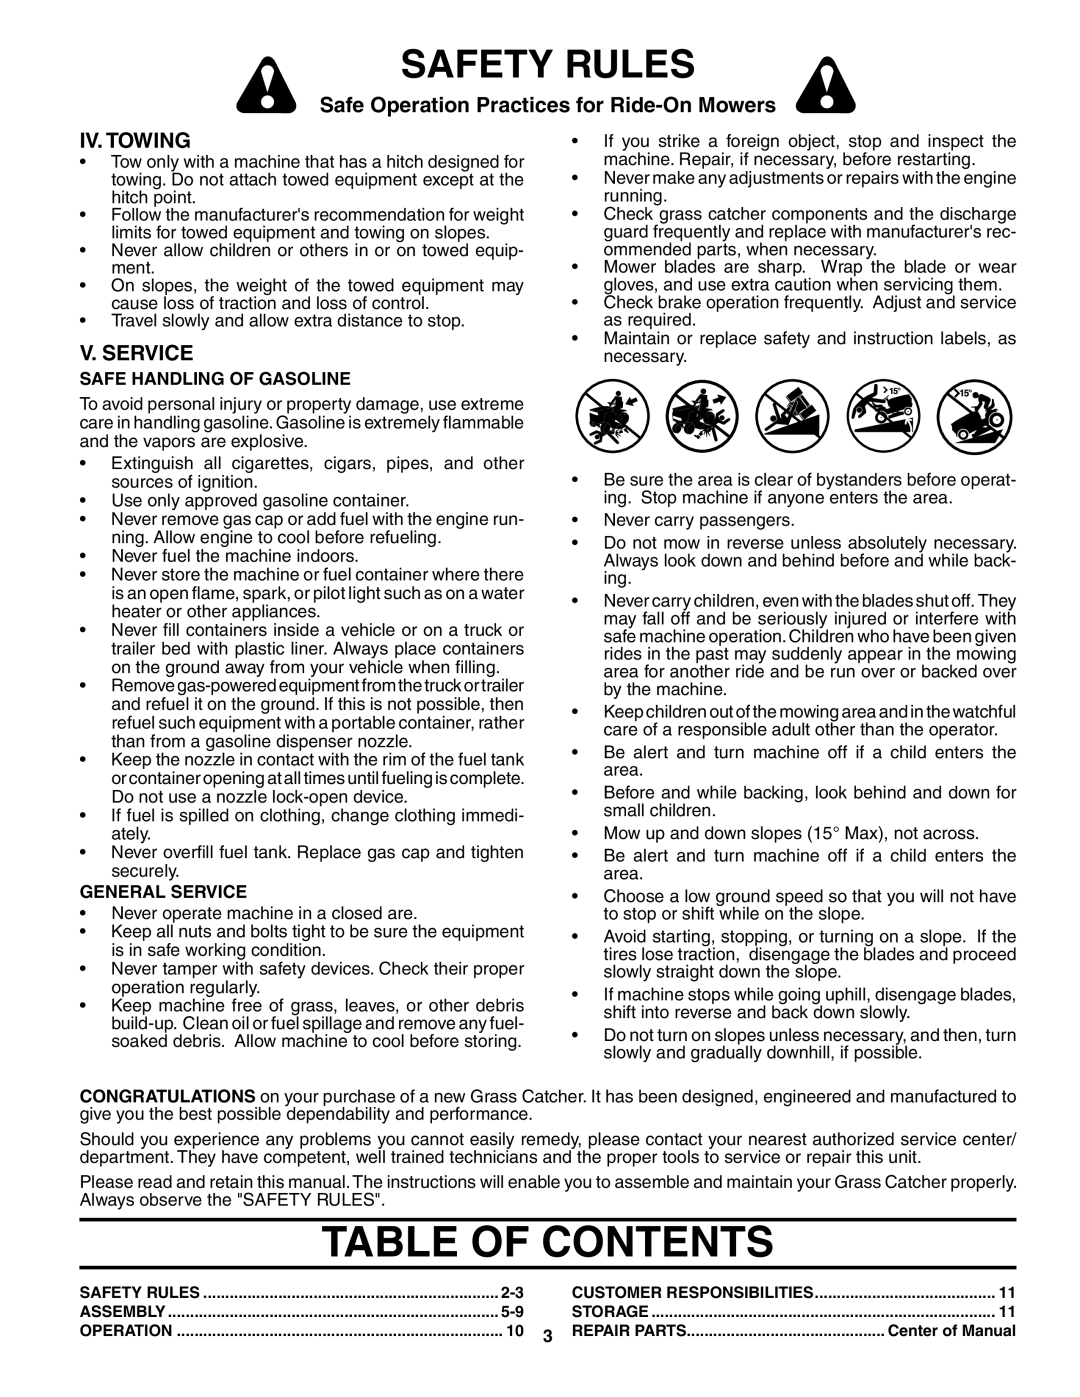 Husqvarna QCT42 Table Of Contents, Iv. Towing, V. Service, Safety Rules, Safe Operation Practices for Ride-OnMowers 